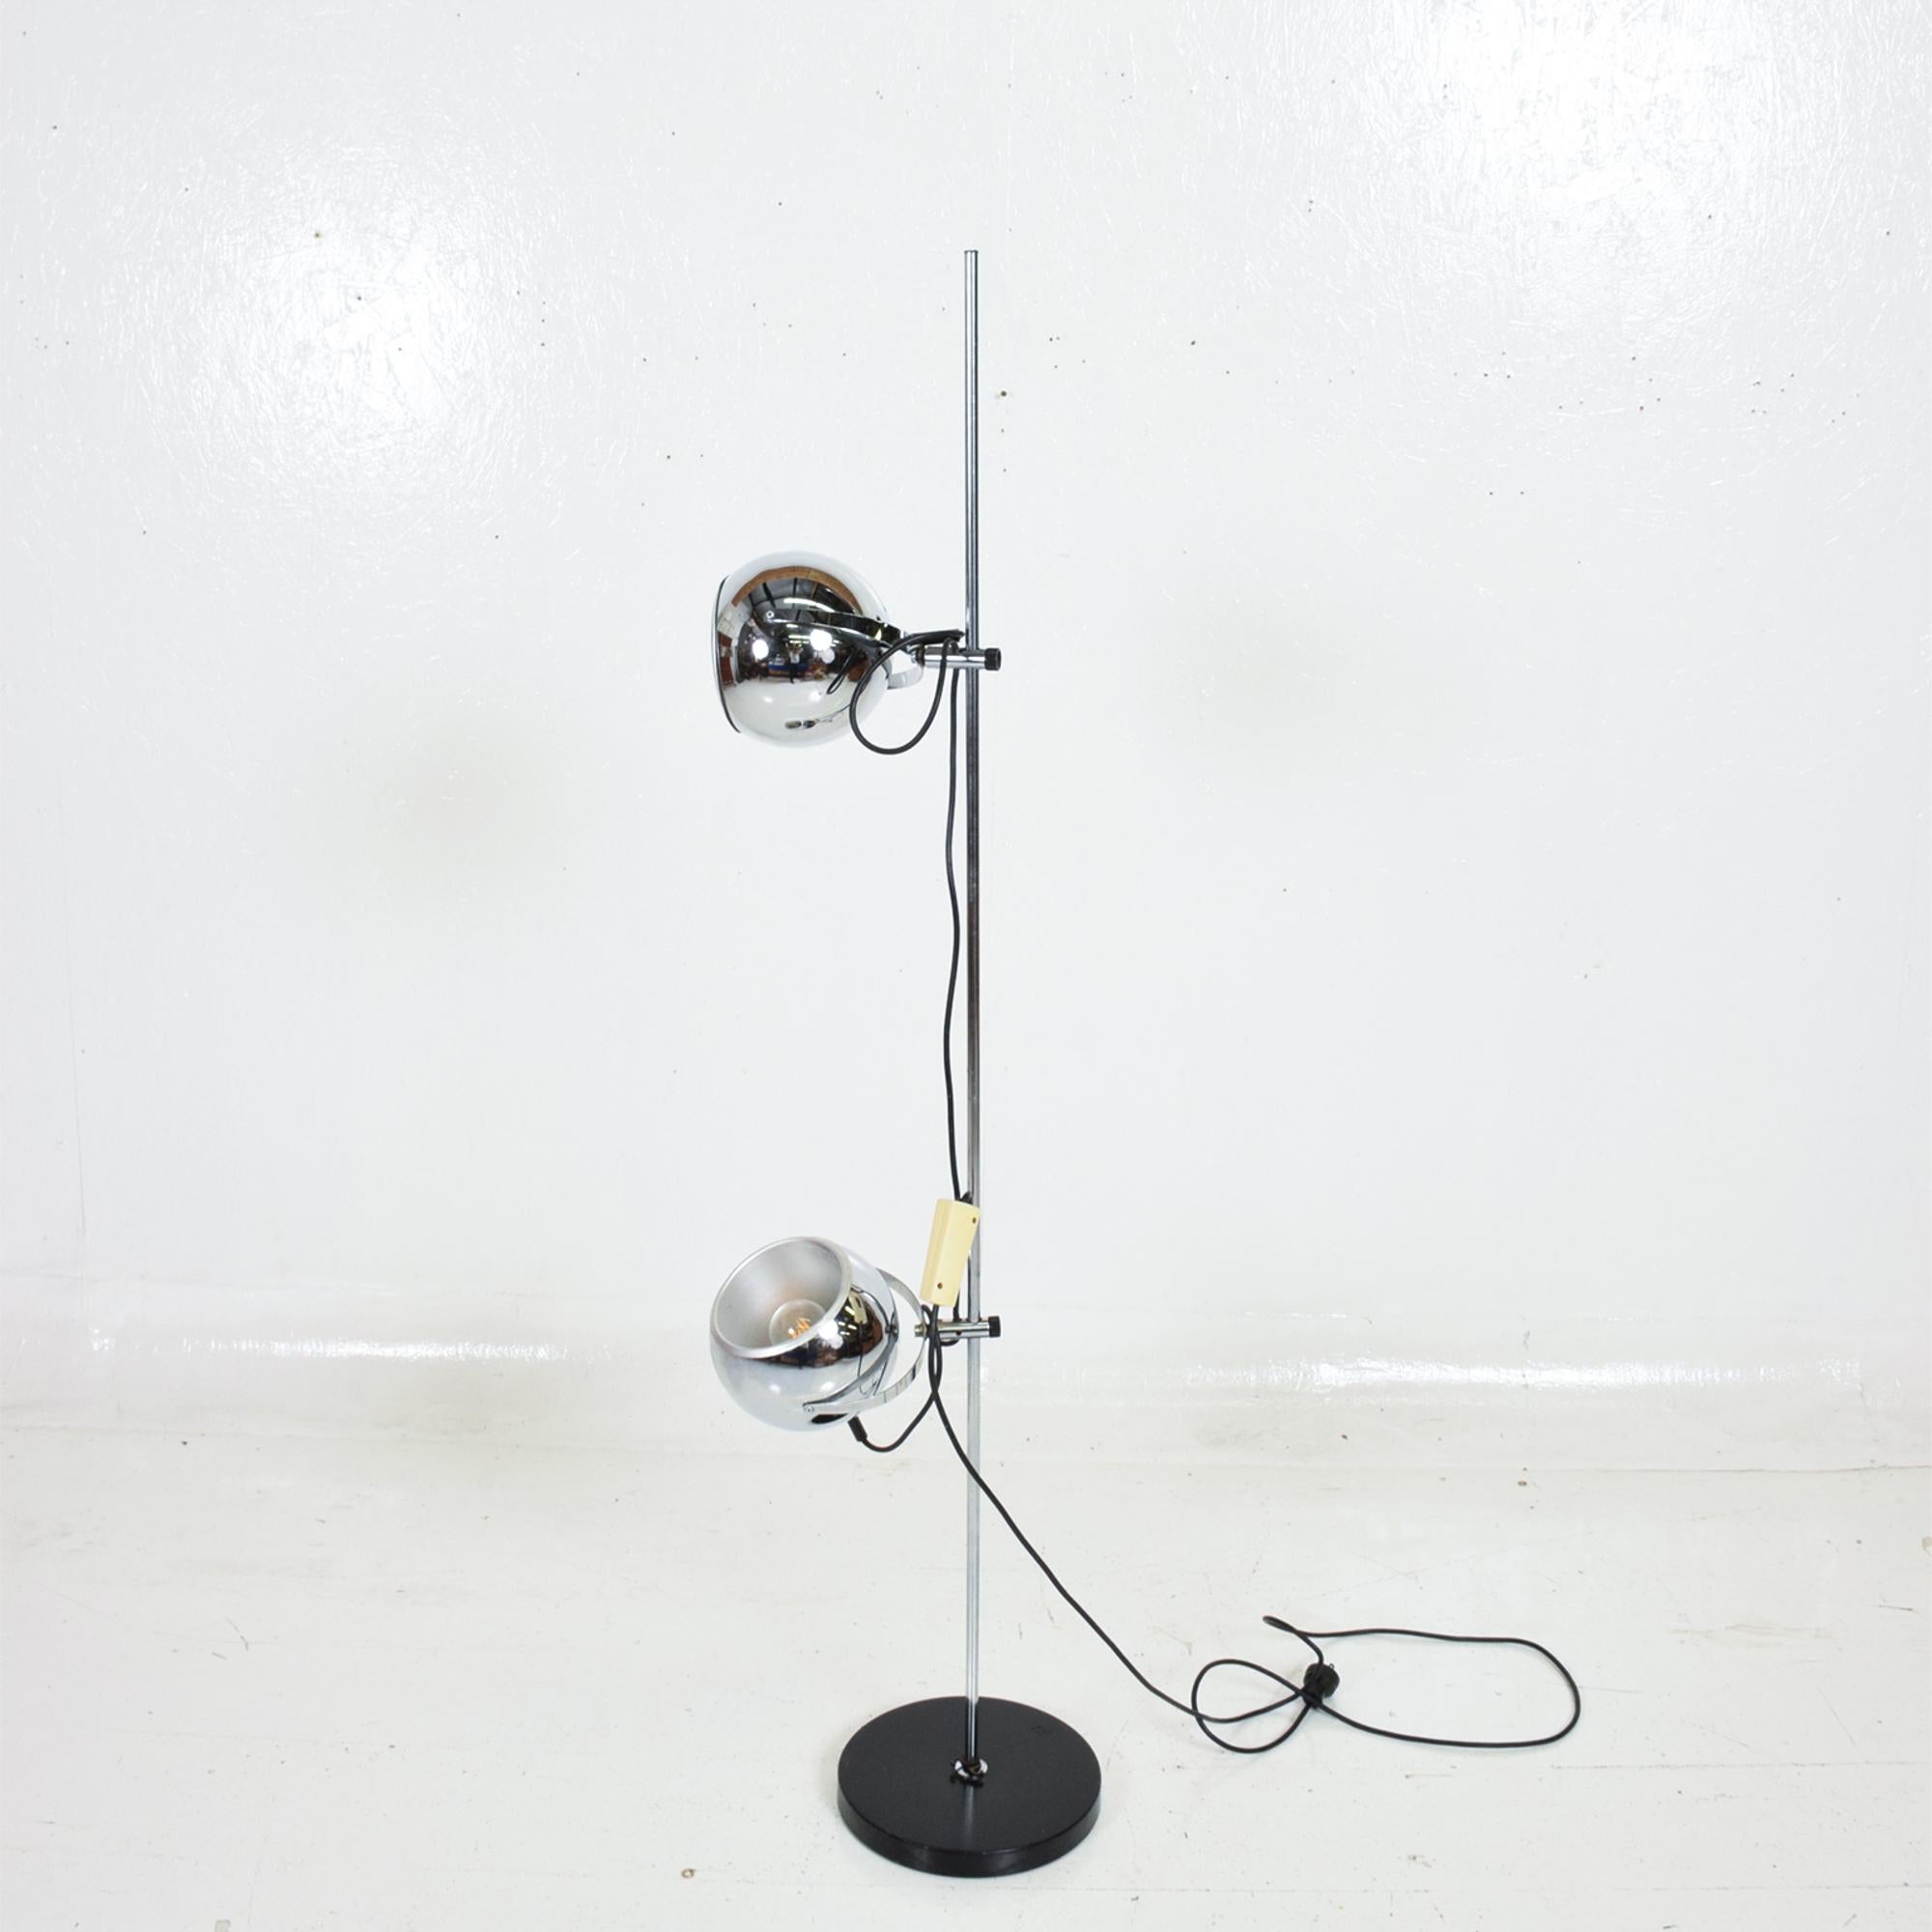 Midcentury Modern chrome floor lamp by Robert Sonneman.
Steel and chrome-plated floor lamp with two adjustable shades.
USA circa 1970s. Unmarked no label present.
Dimensions: 60 height x 10 .5 in diameter, shades 6 in diameter, sphere.
Original